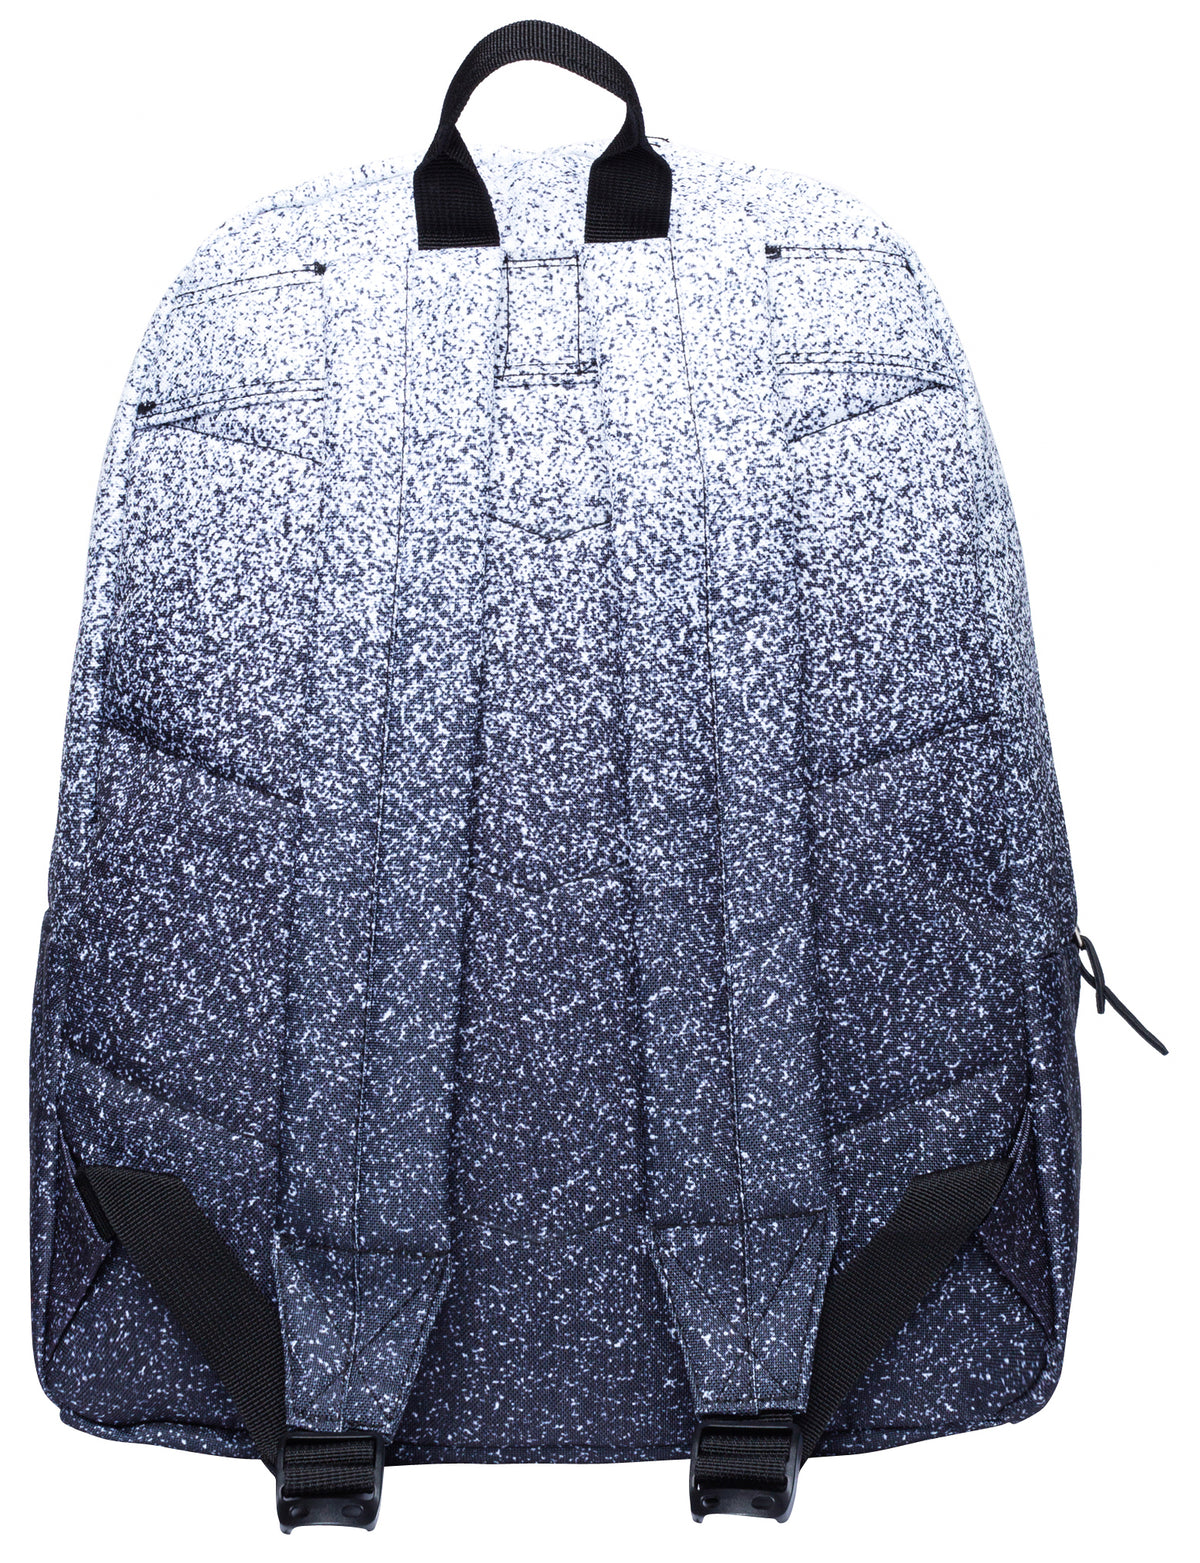 Hype Classic Backpack - Black Speckle Fade